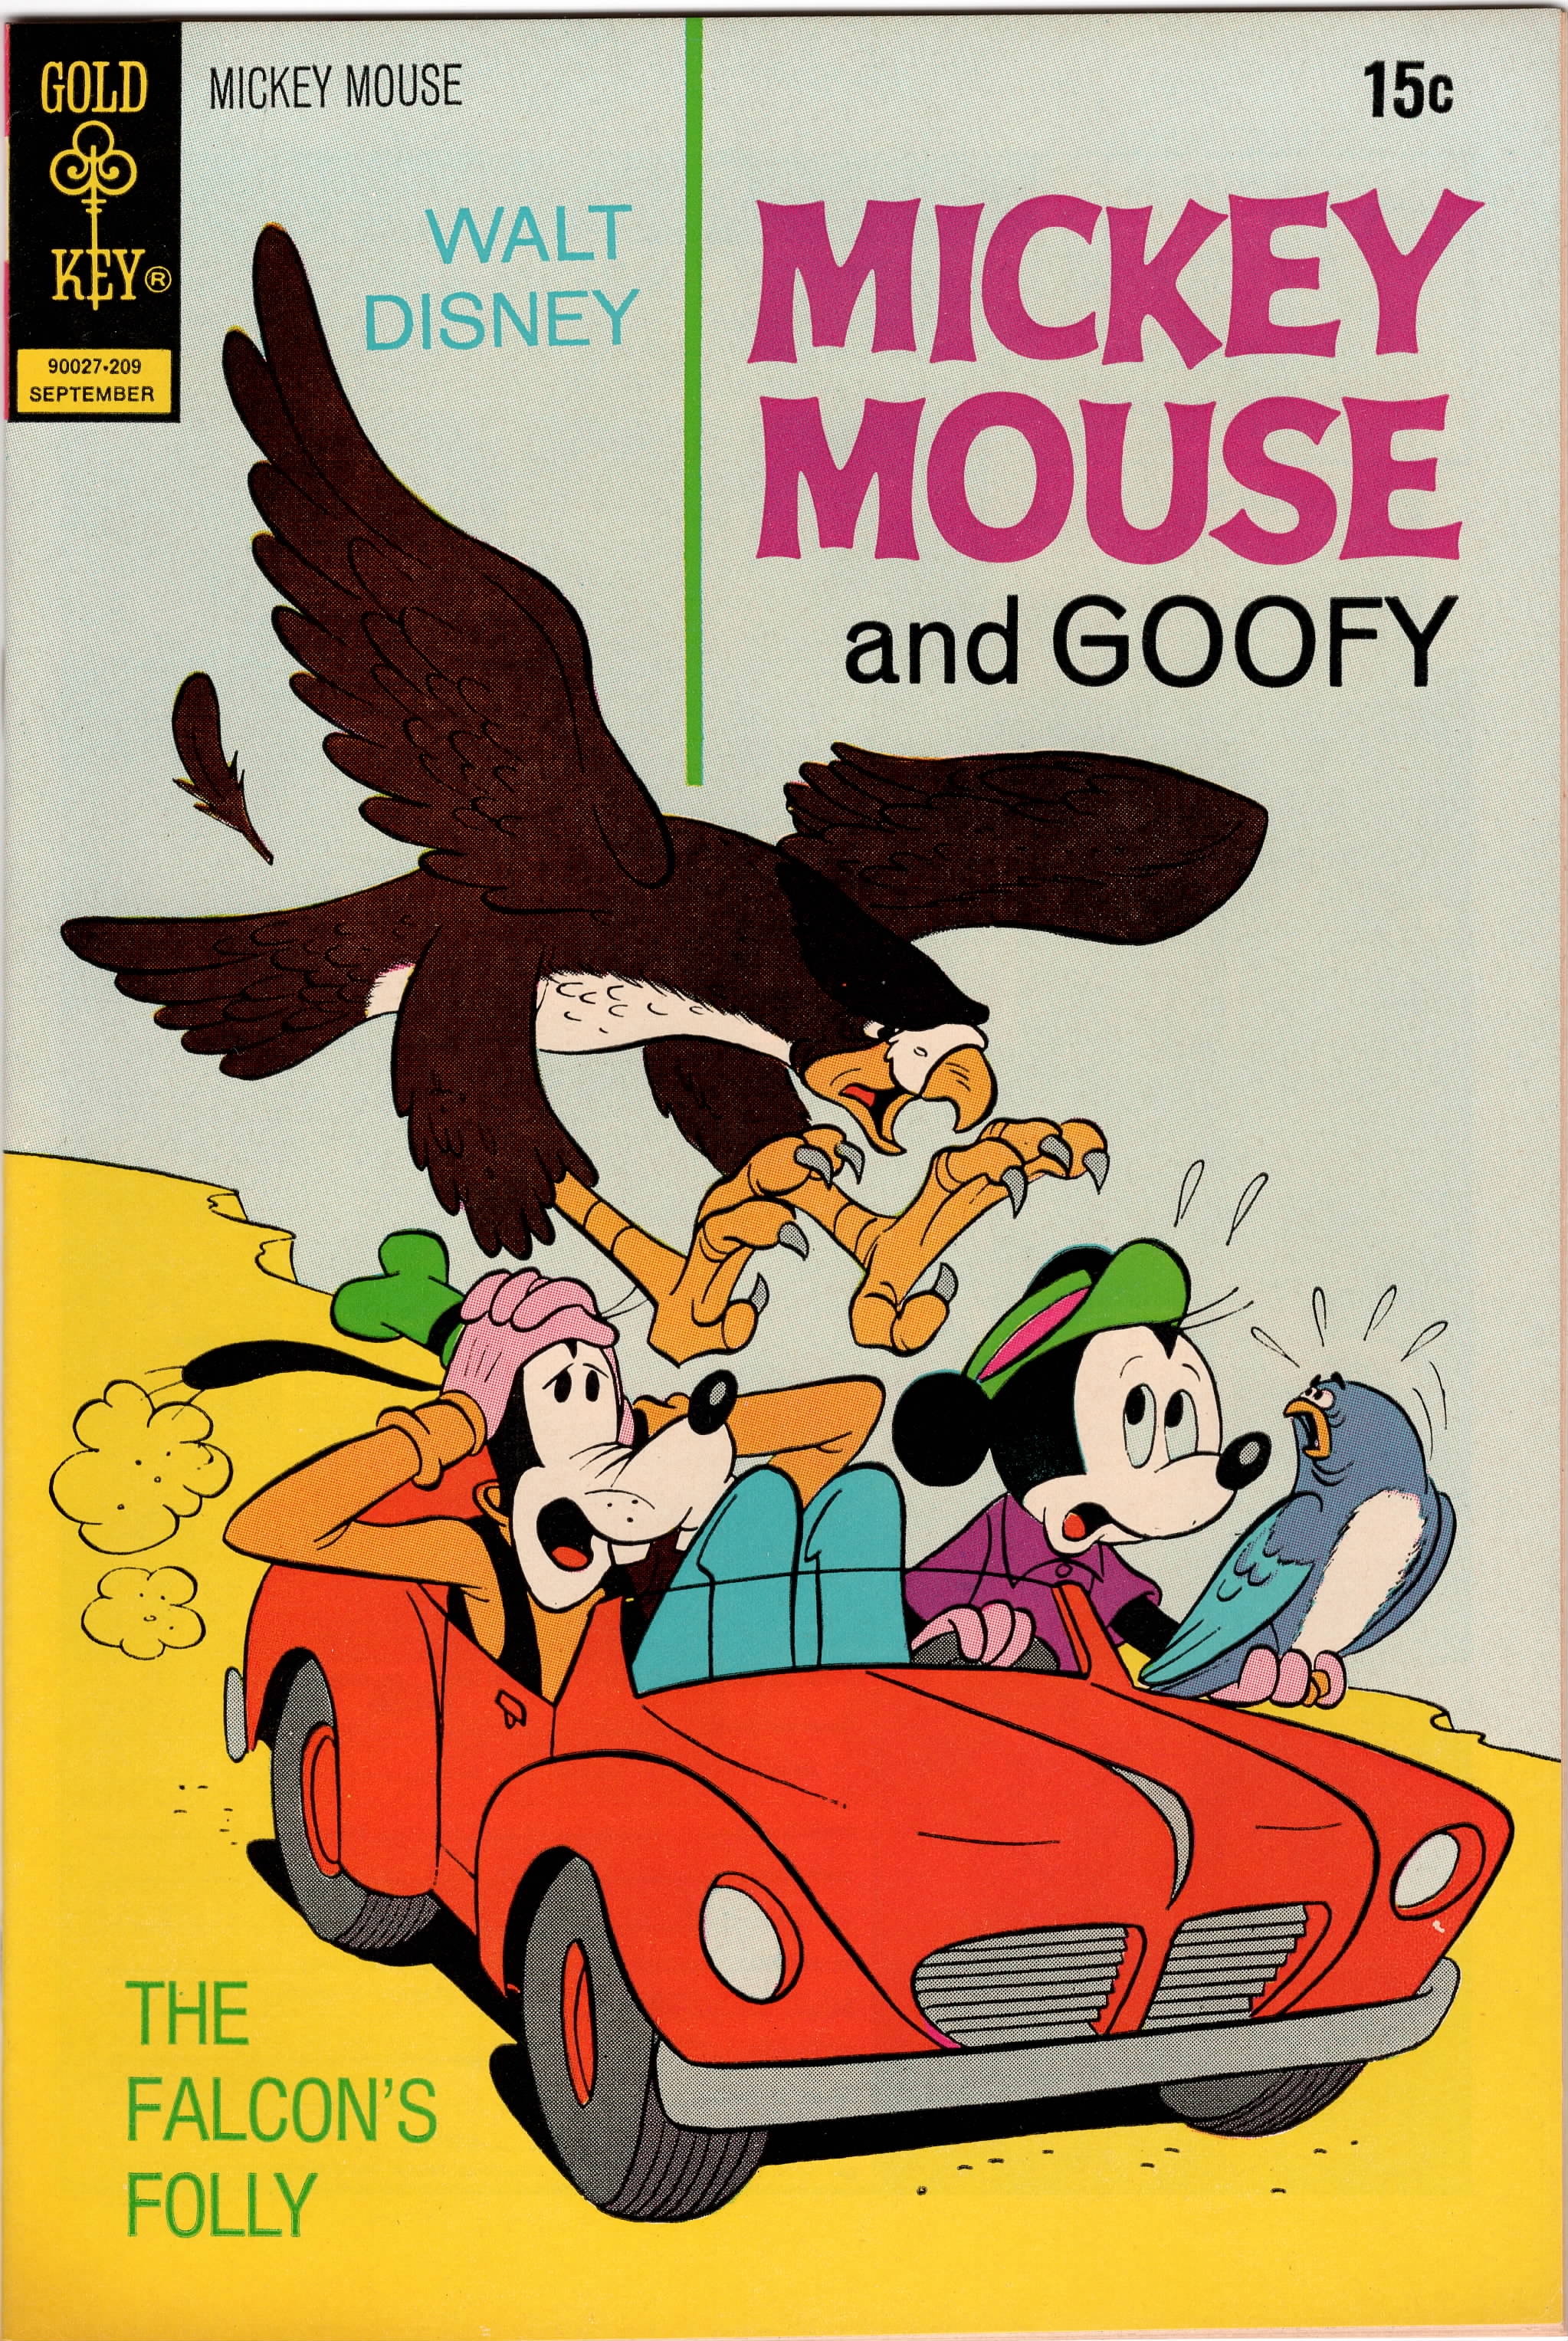 Mickey Mouse #138